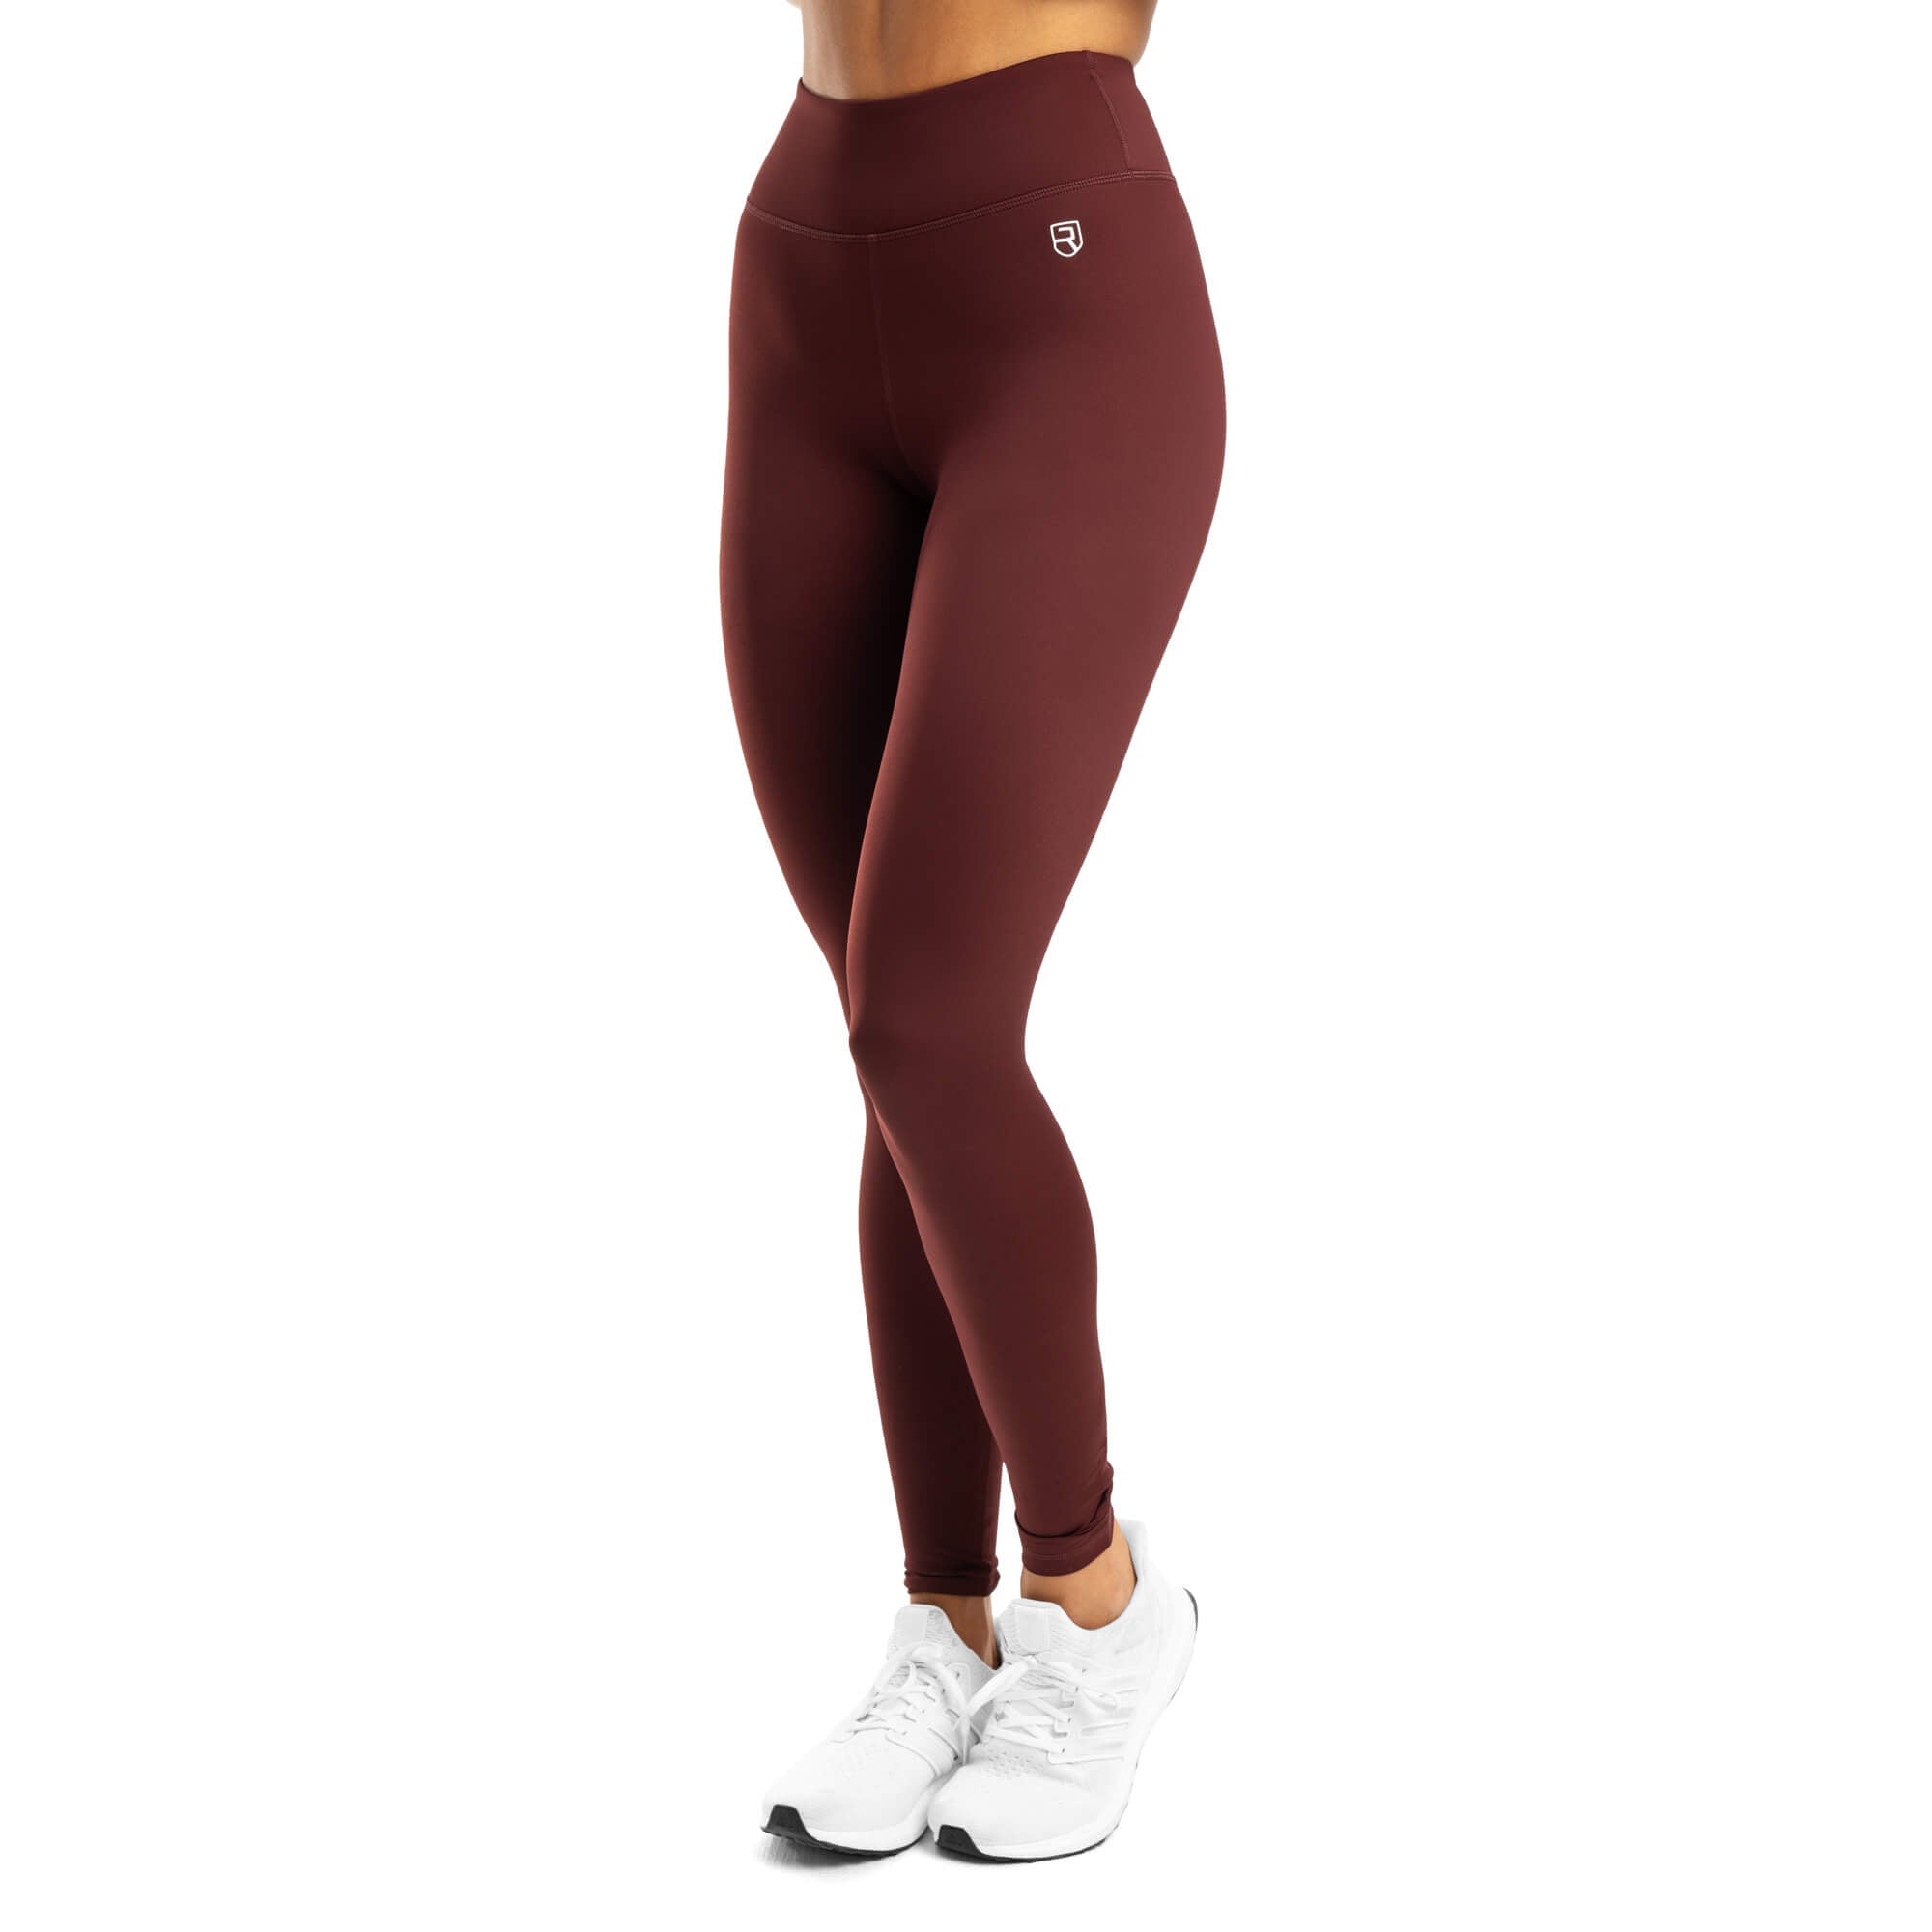 NWT *BOUTIQUE* BURGUNDY 3 WAIST LEGGINGS PLUS ONESIZE FITS 14-20 in 2023